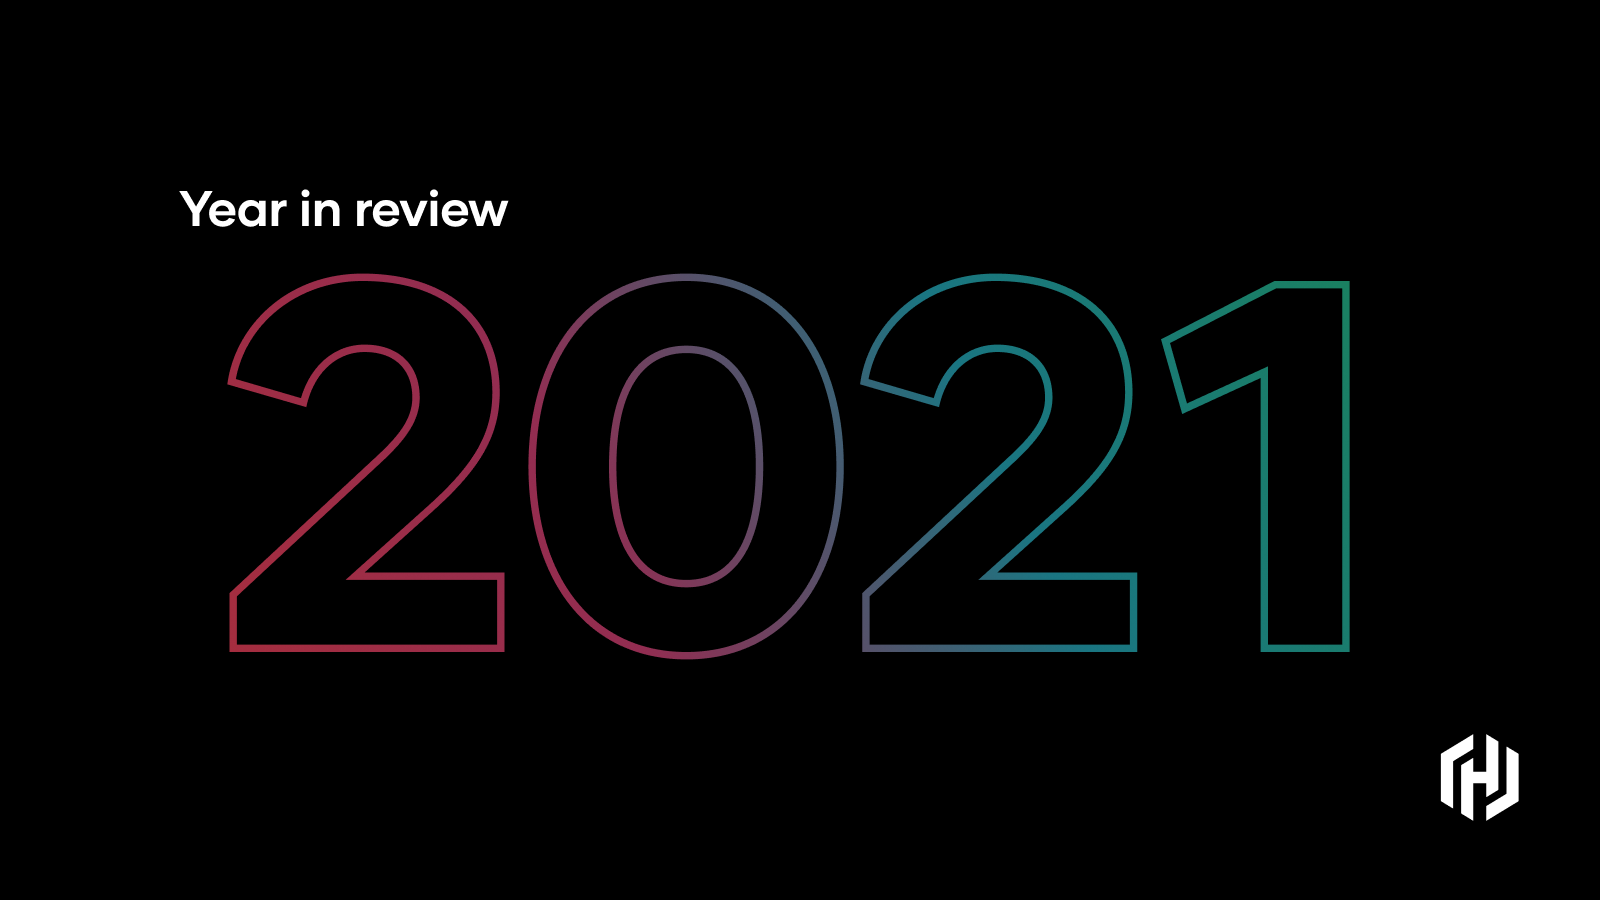 HashiCorp 2021 Year in Review